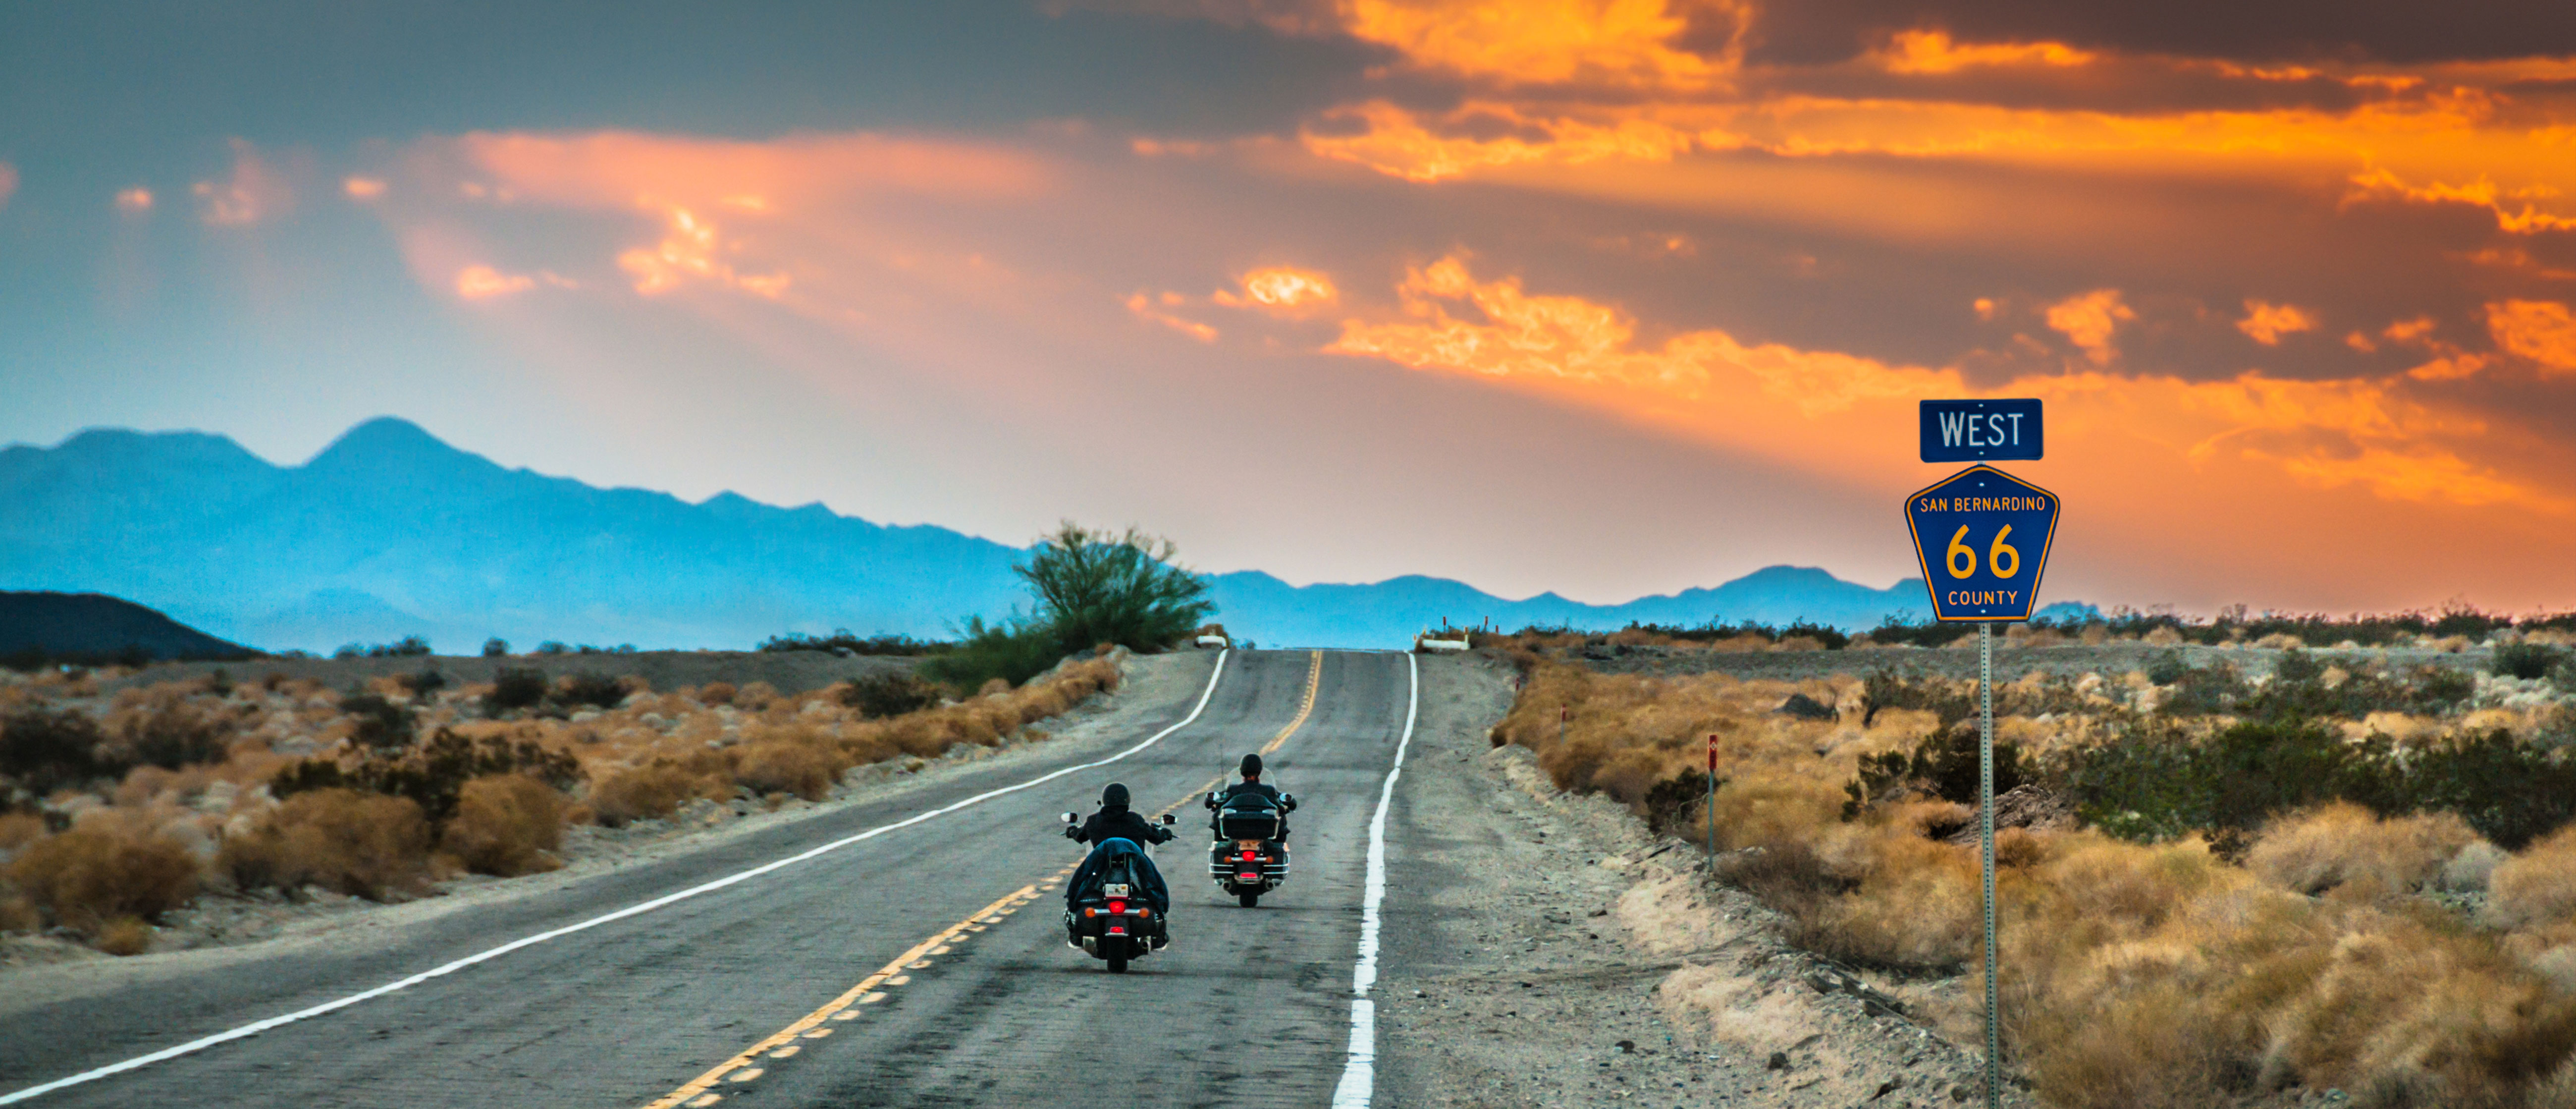 Motorcycles cruising through the California desert on Route 66 at sunset